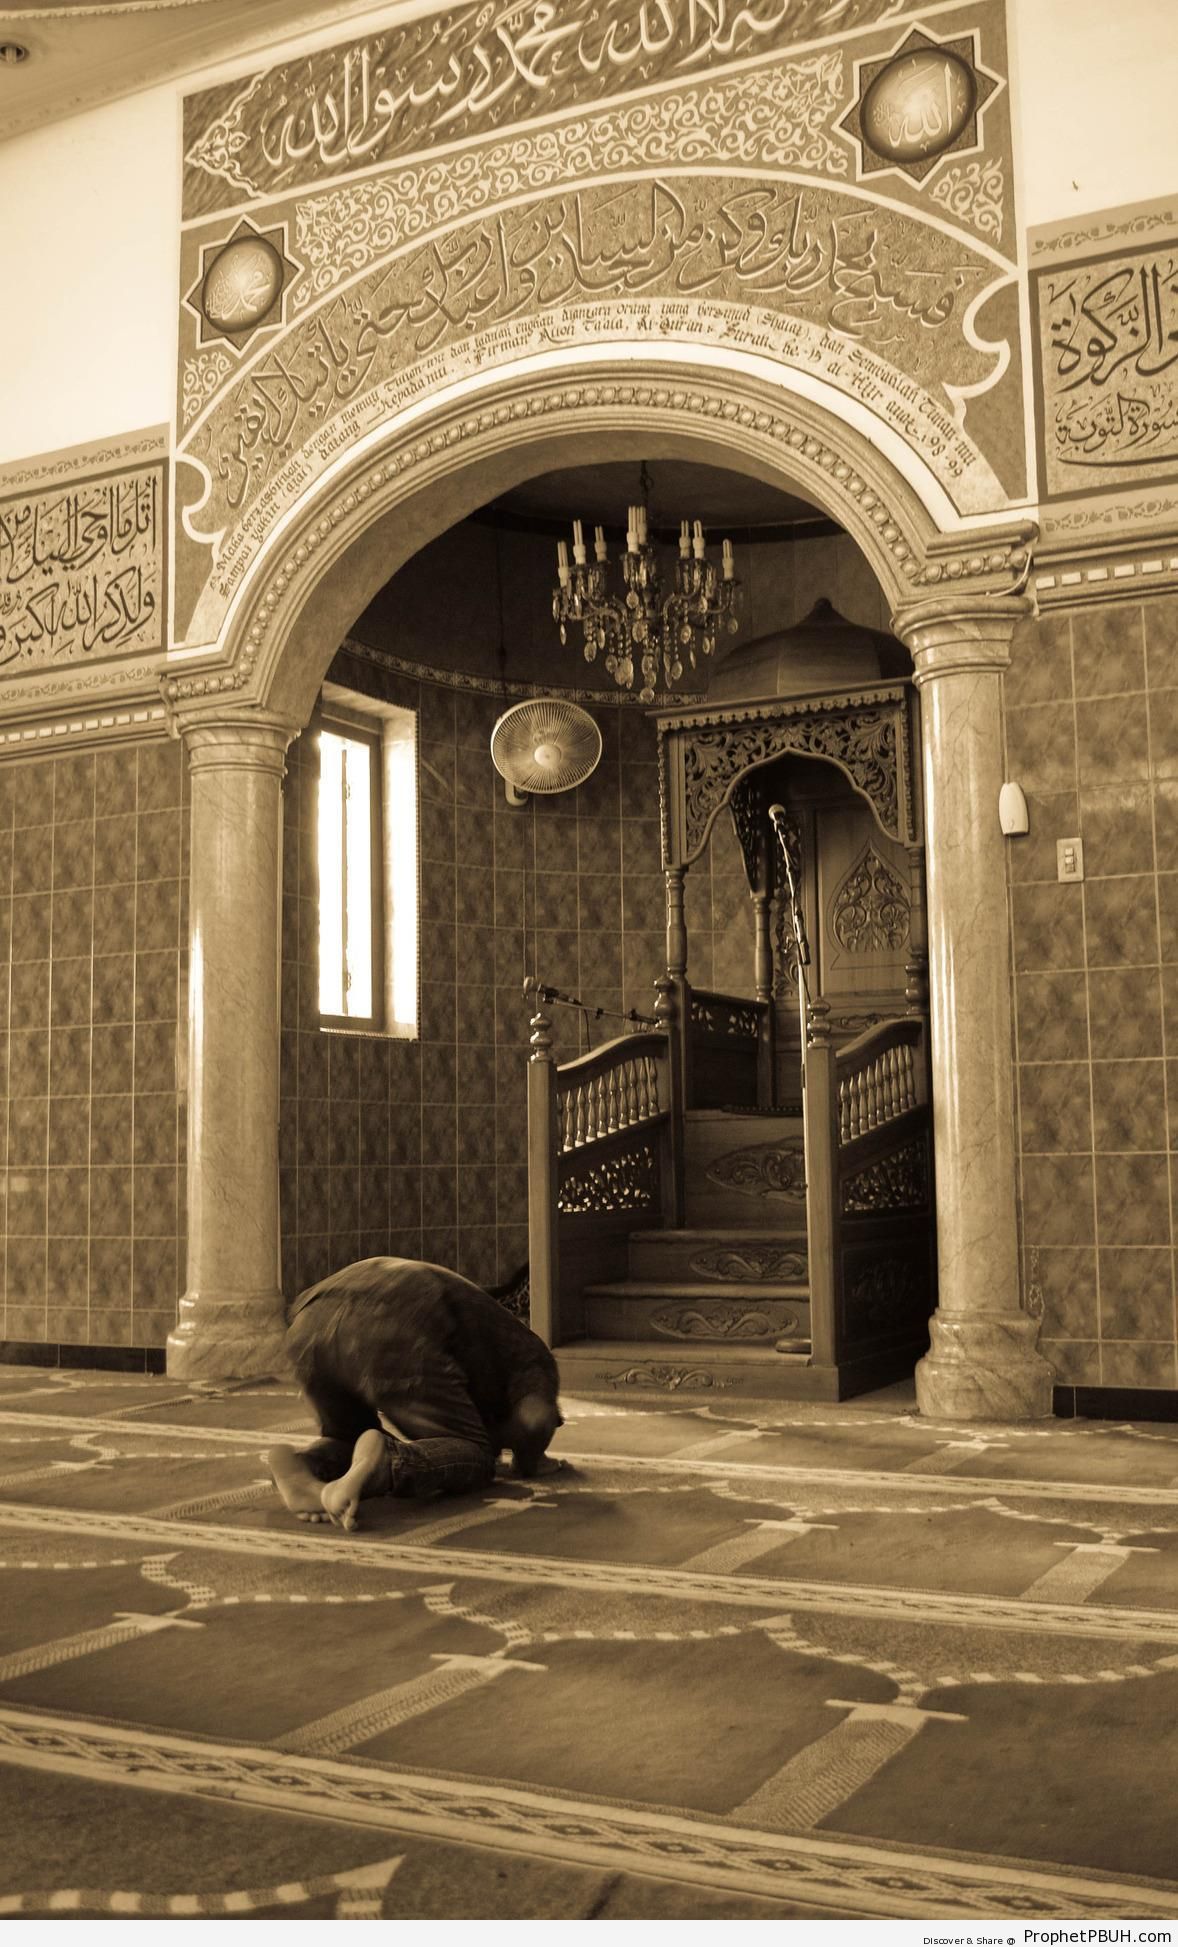 Man in Sujood at Mosque - Islamic Architecture -Picture